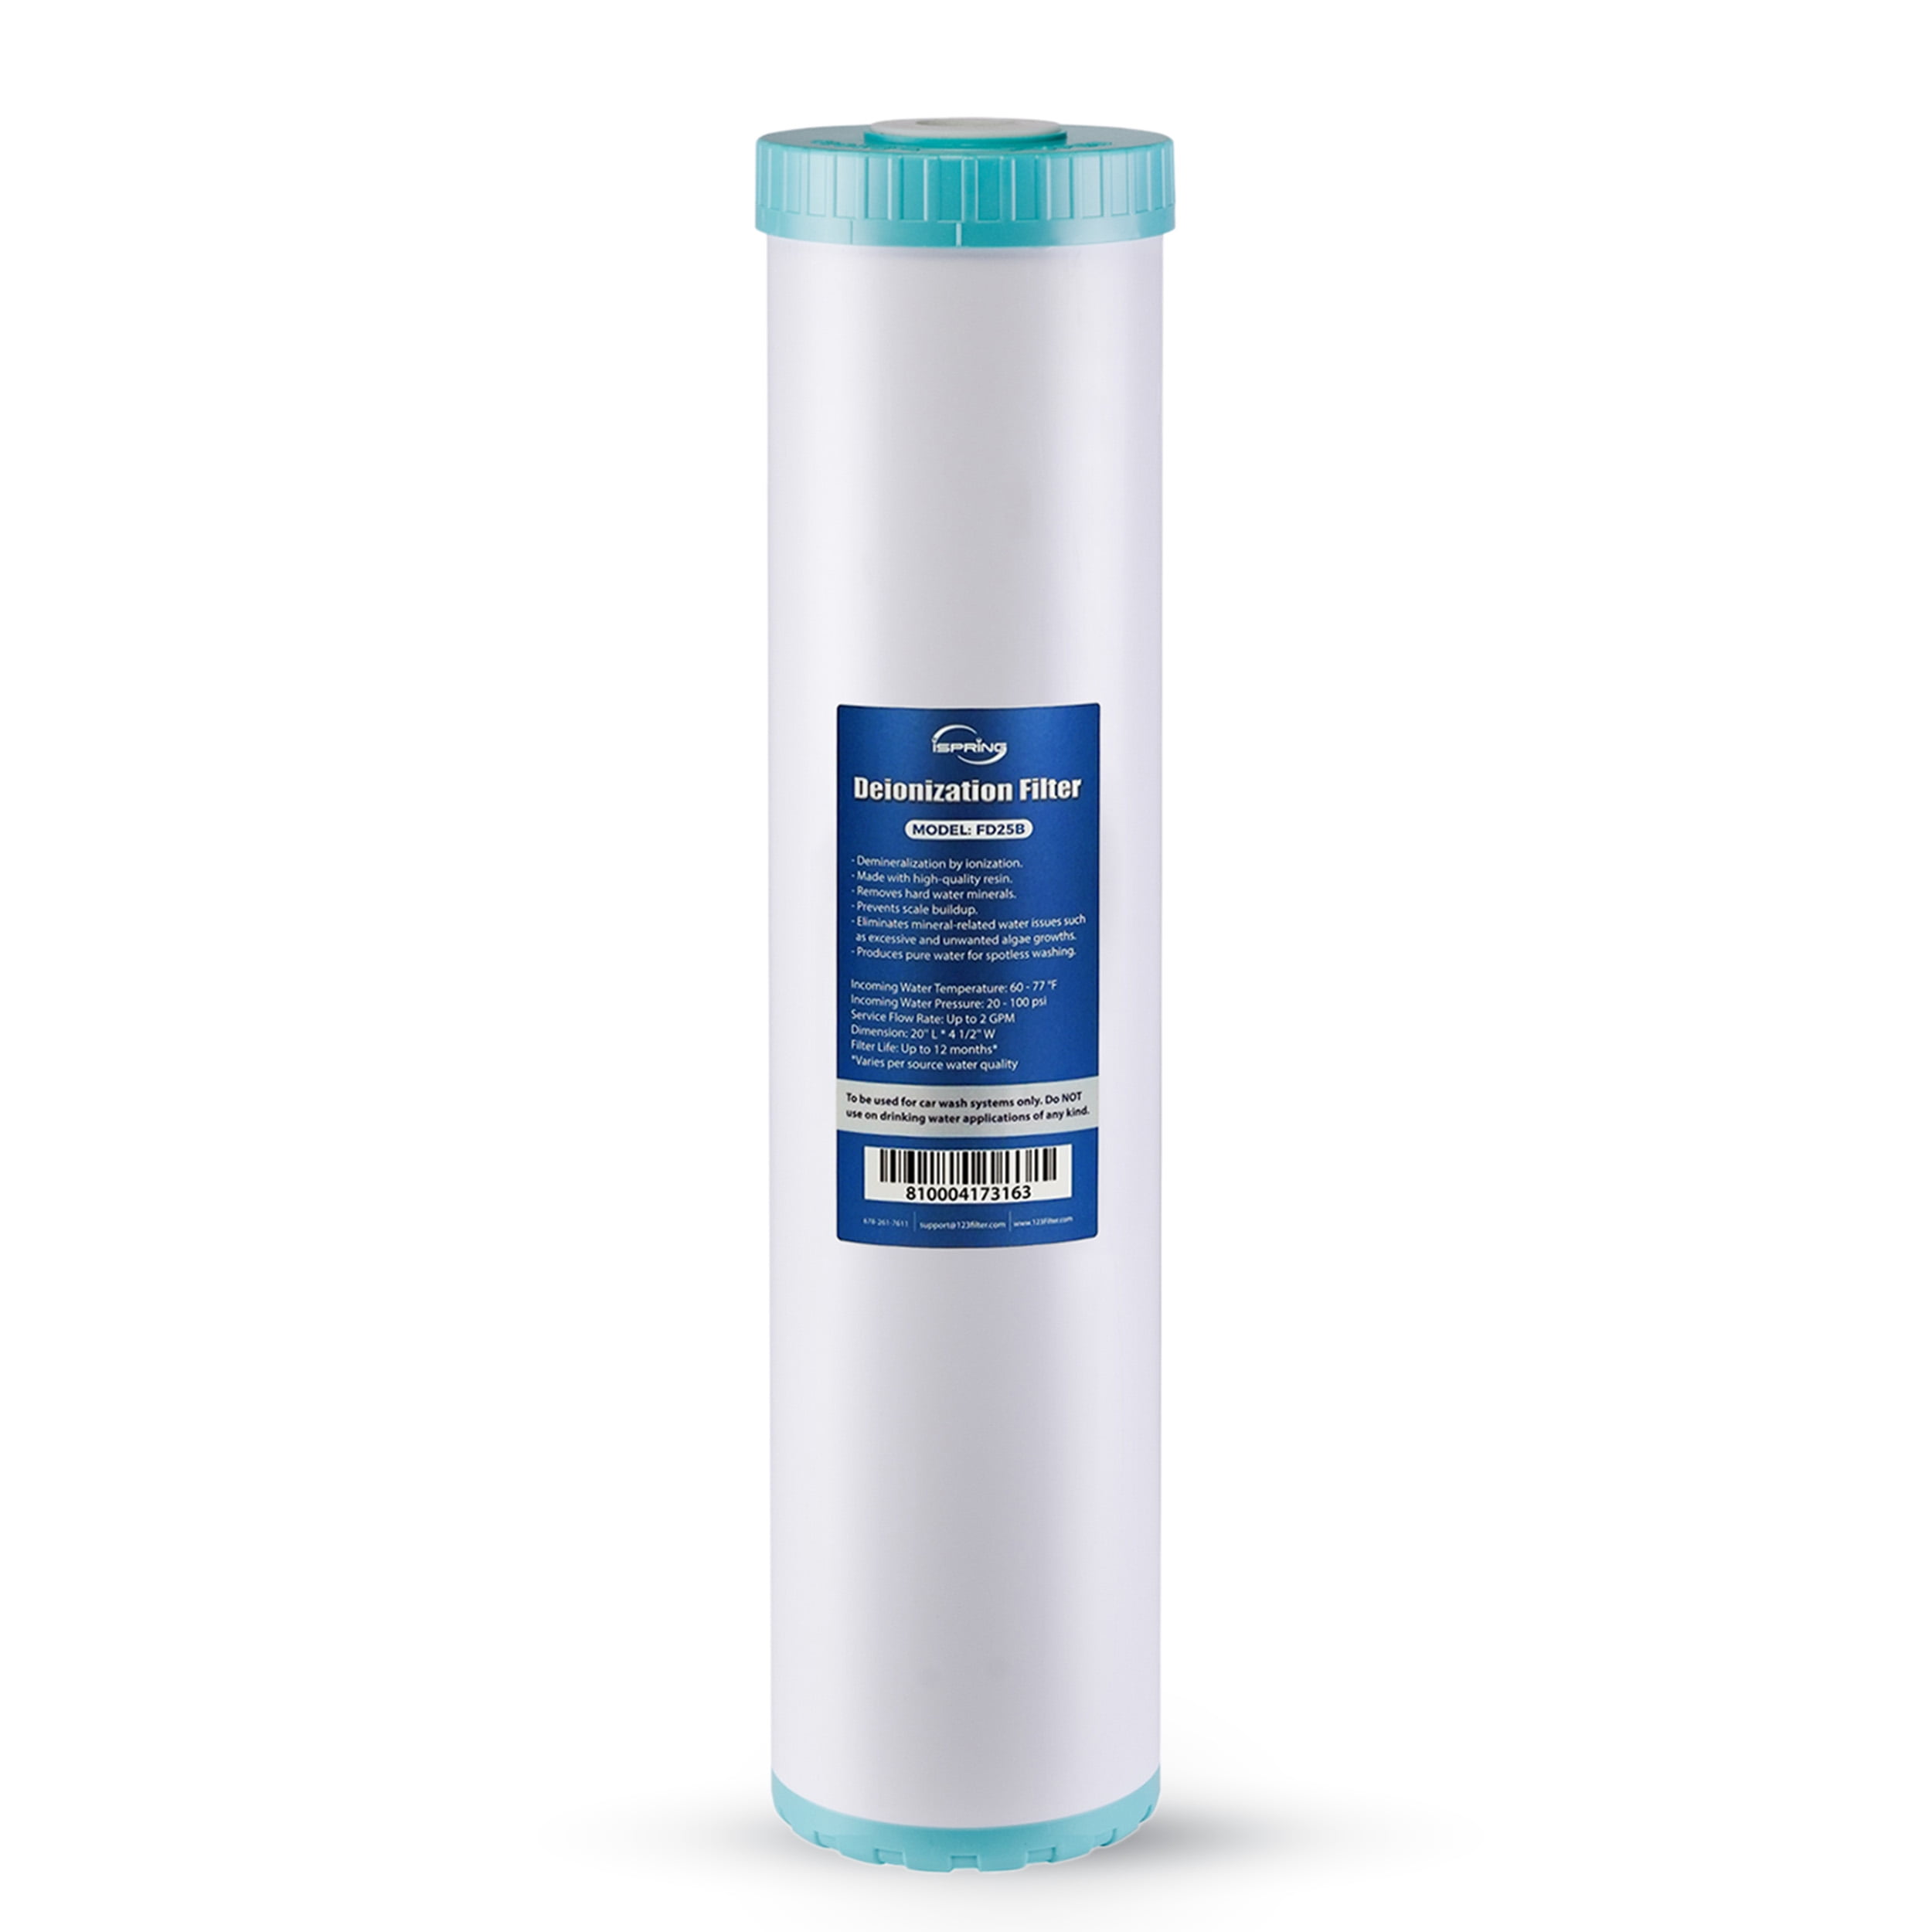 iSpring FD25B Deionized Water Filter for Spotless Car Wash System, Fits WGB22BD Deionized Water System for Car Wash, 4.5 x 20